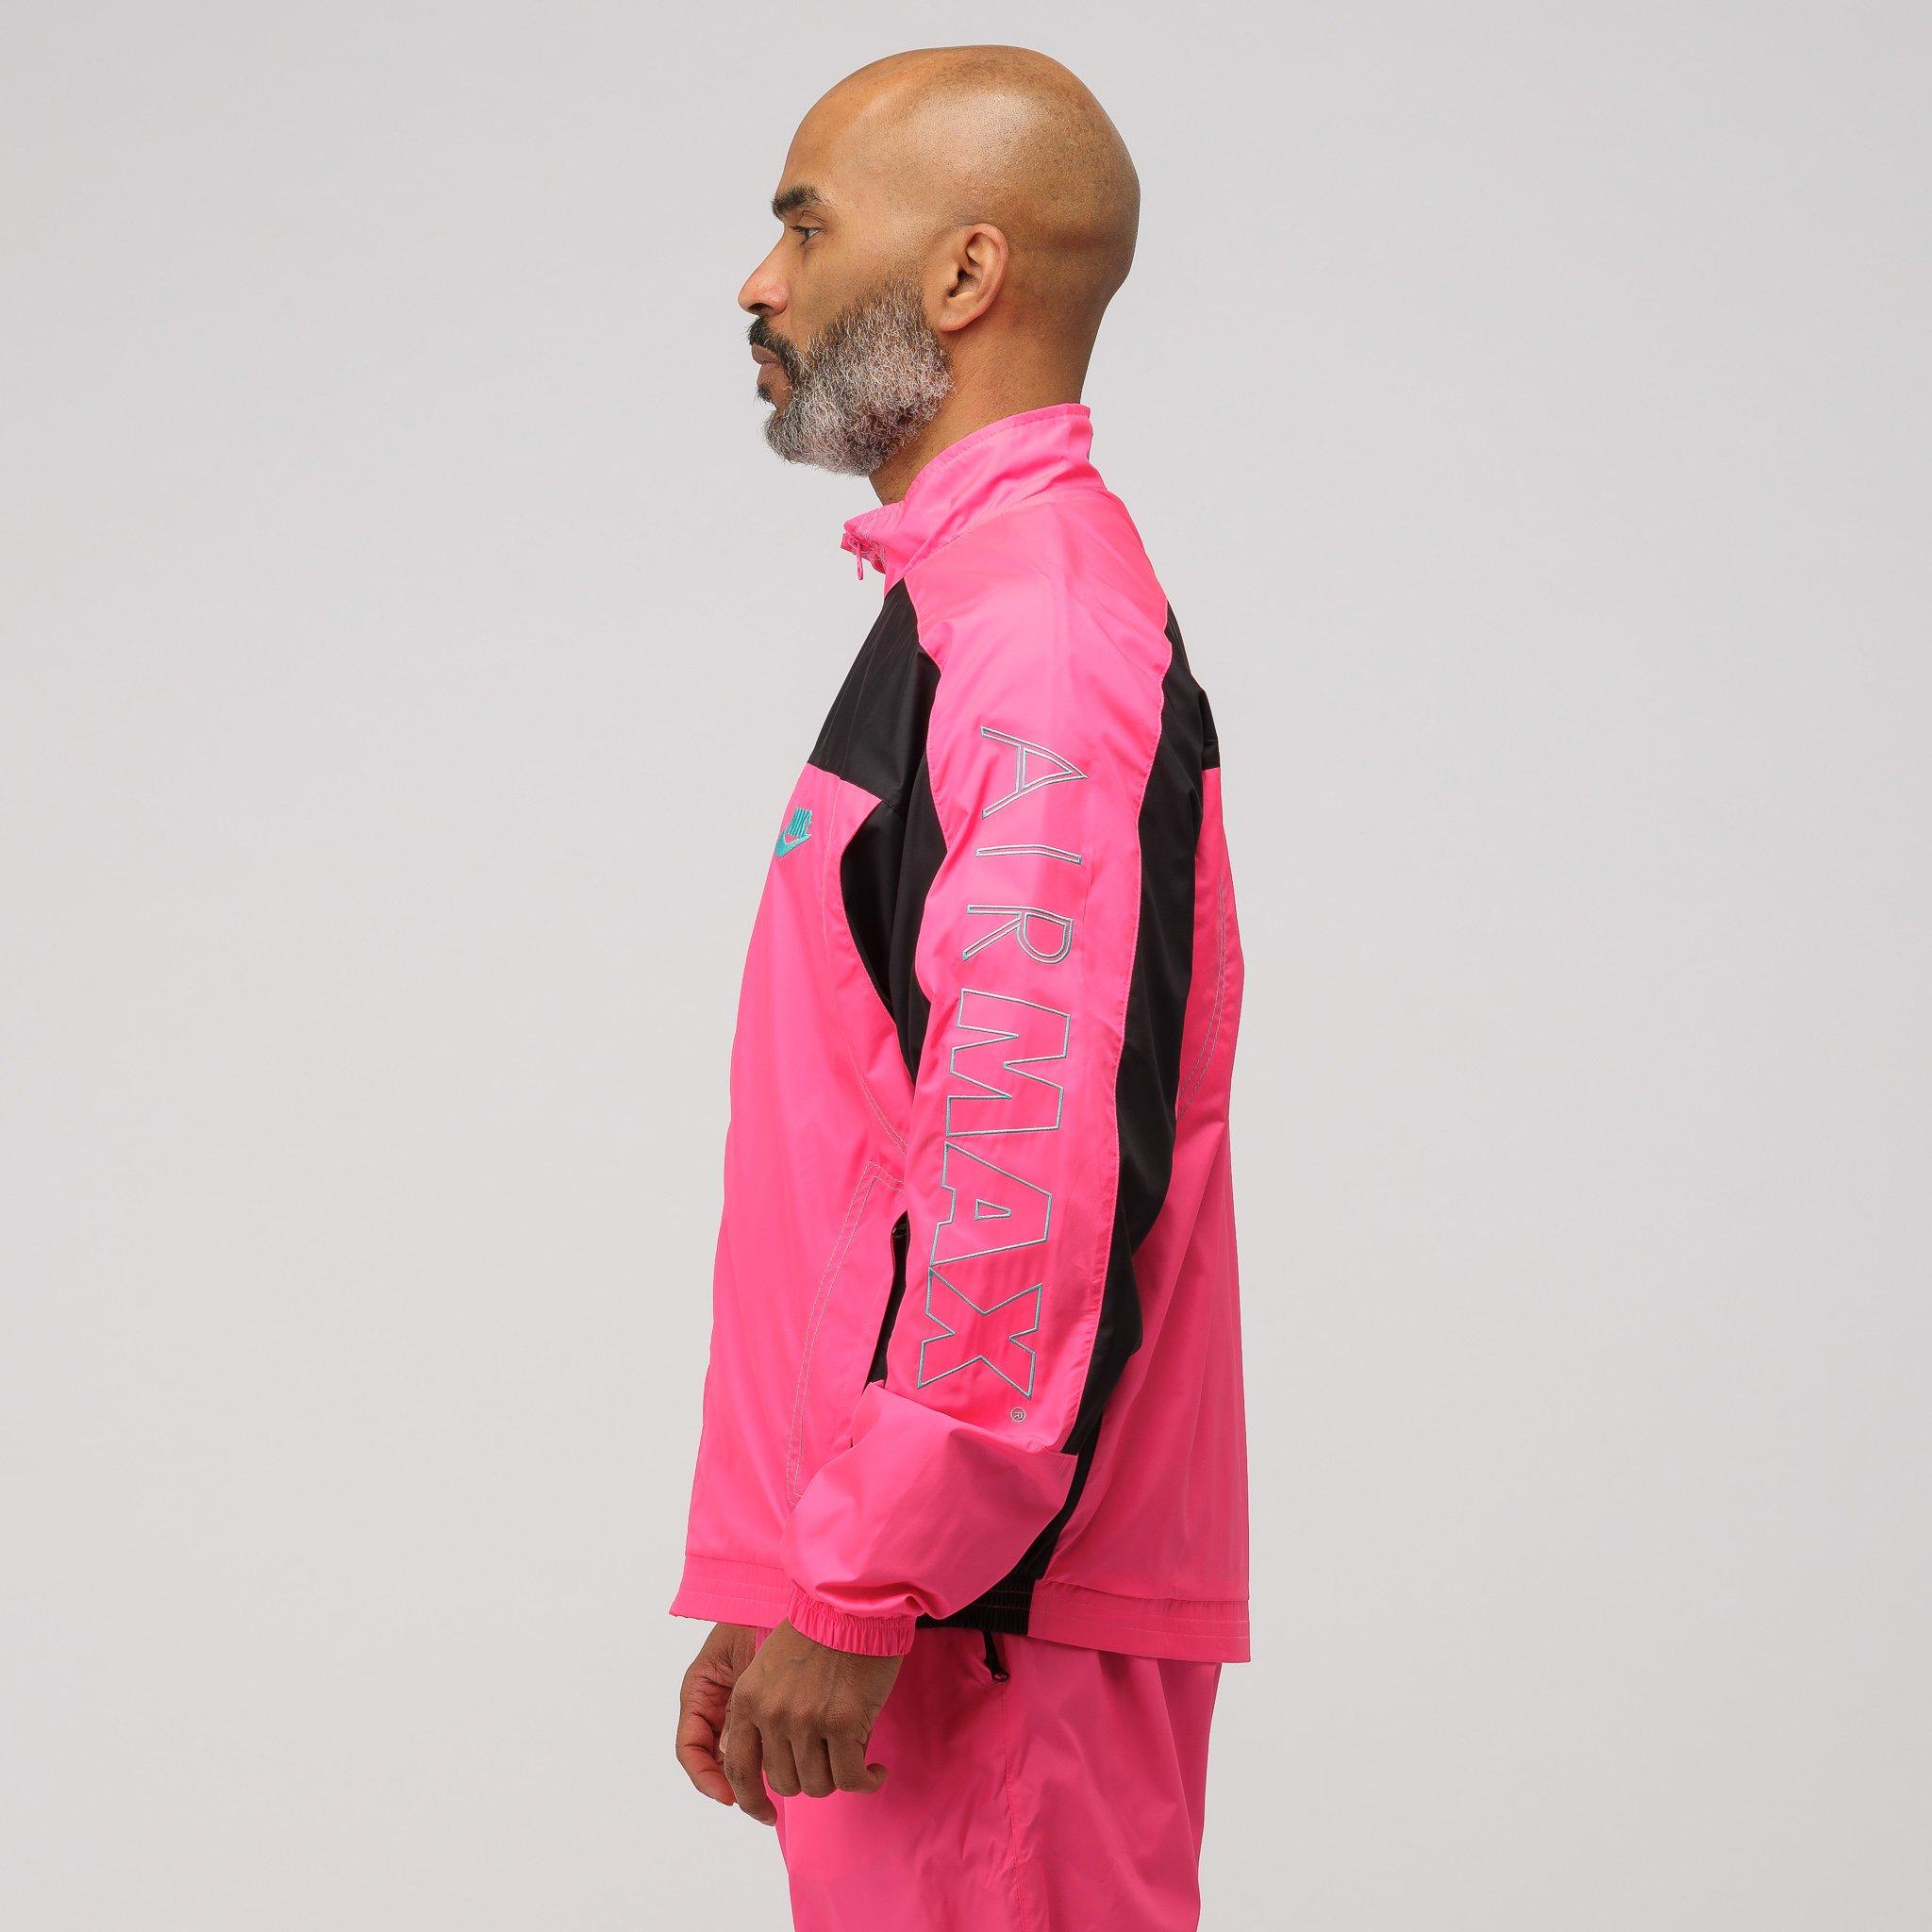 Nike Synthetic Atmos Vintage Patchwork Track Jacket in Pink/Black 